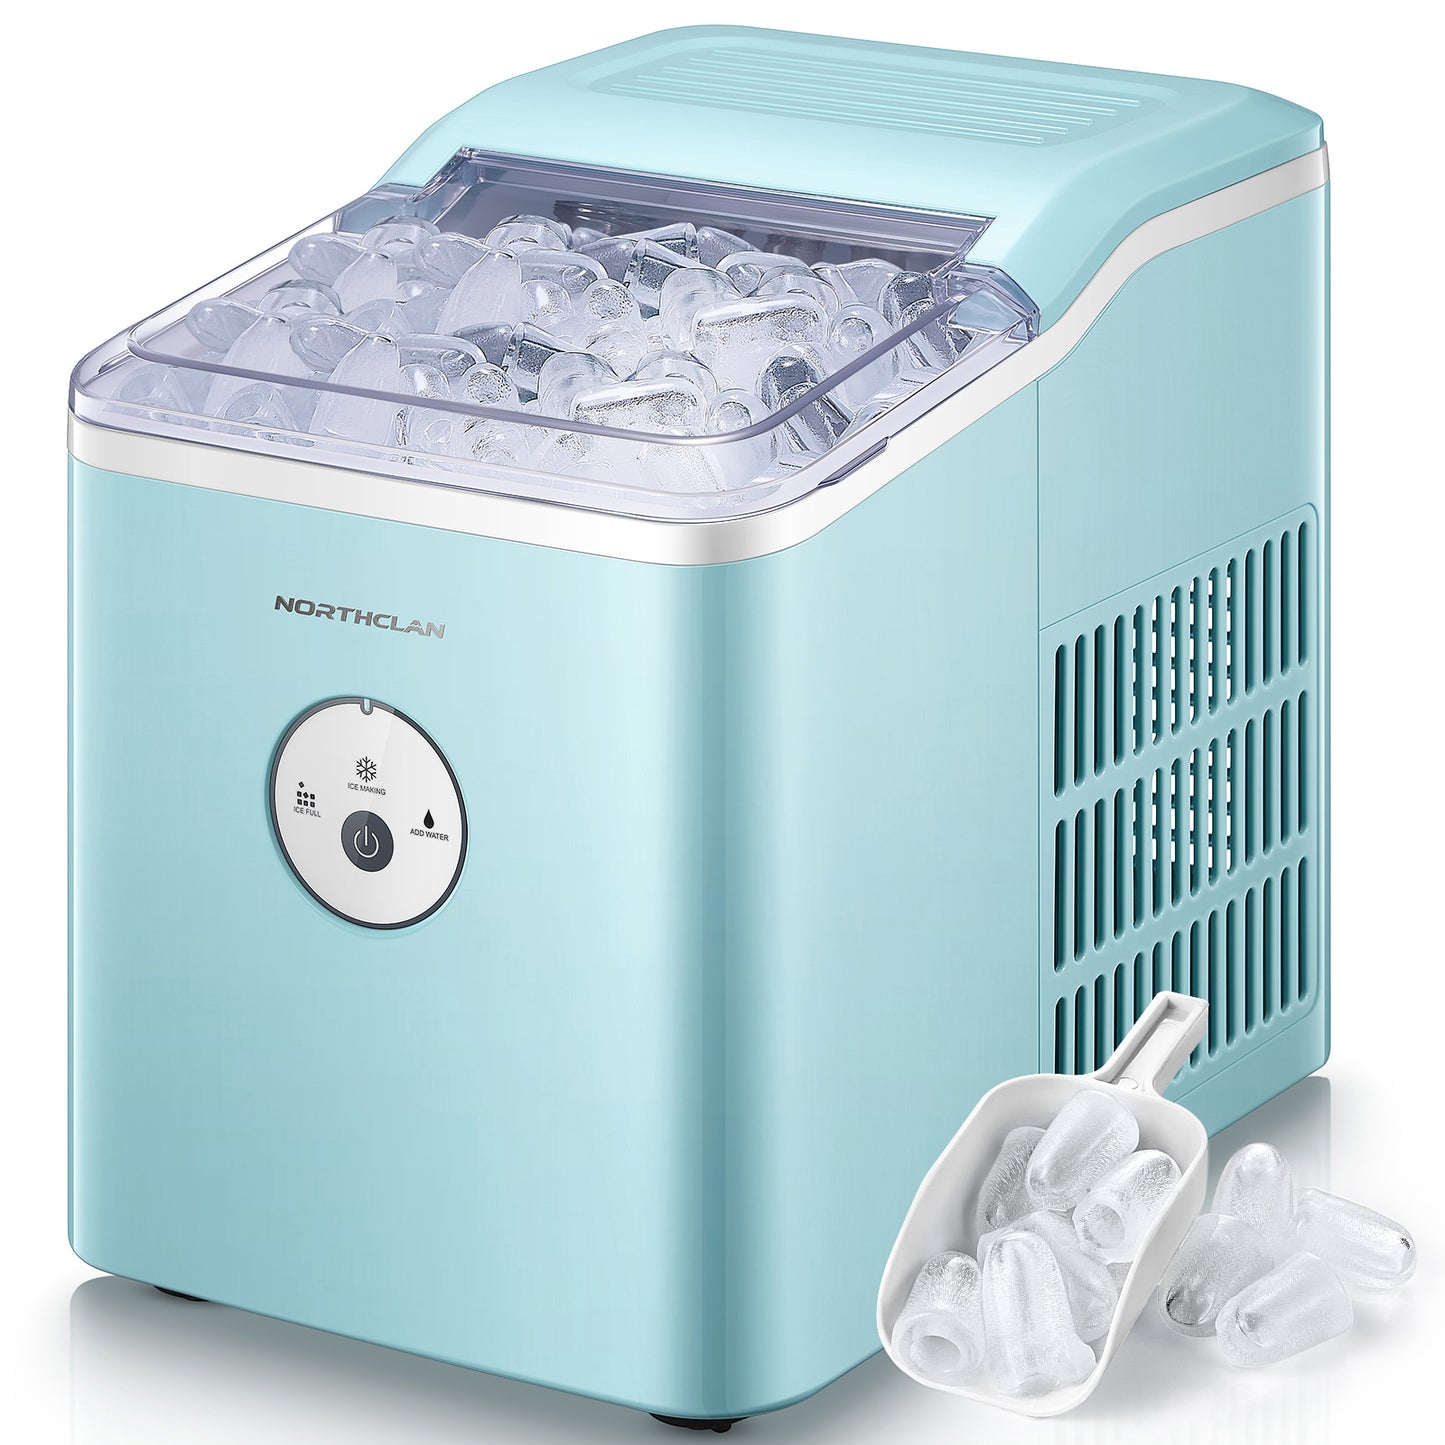 Ice Maker Countertop, 28 lbs Ice In 24 Hrs, 9 Ice Cubes Ready In 5 Minutes, Portable Ice Machine 2L With Led Display Perfect for Parties Mixed Drinks, Ice Scoop & Basket, Mint Blue, NORTHCLAN